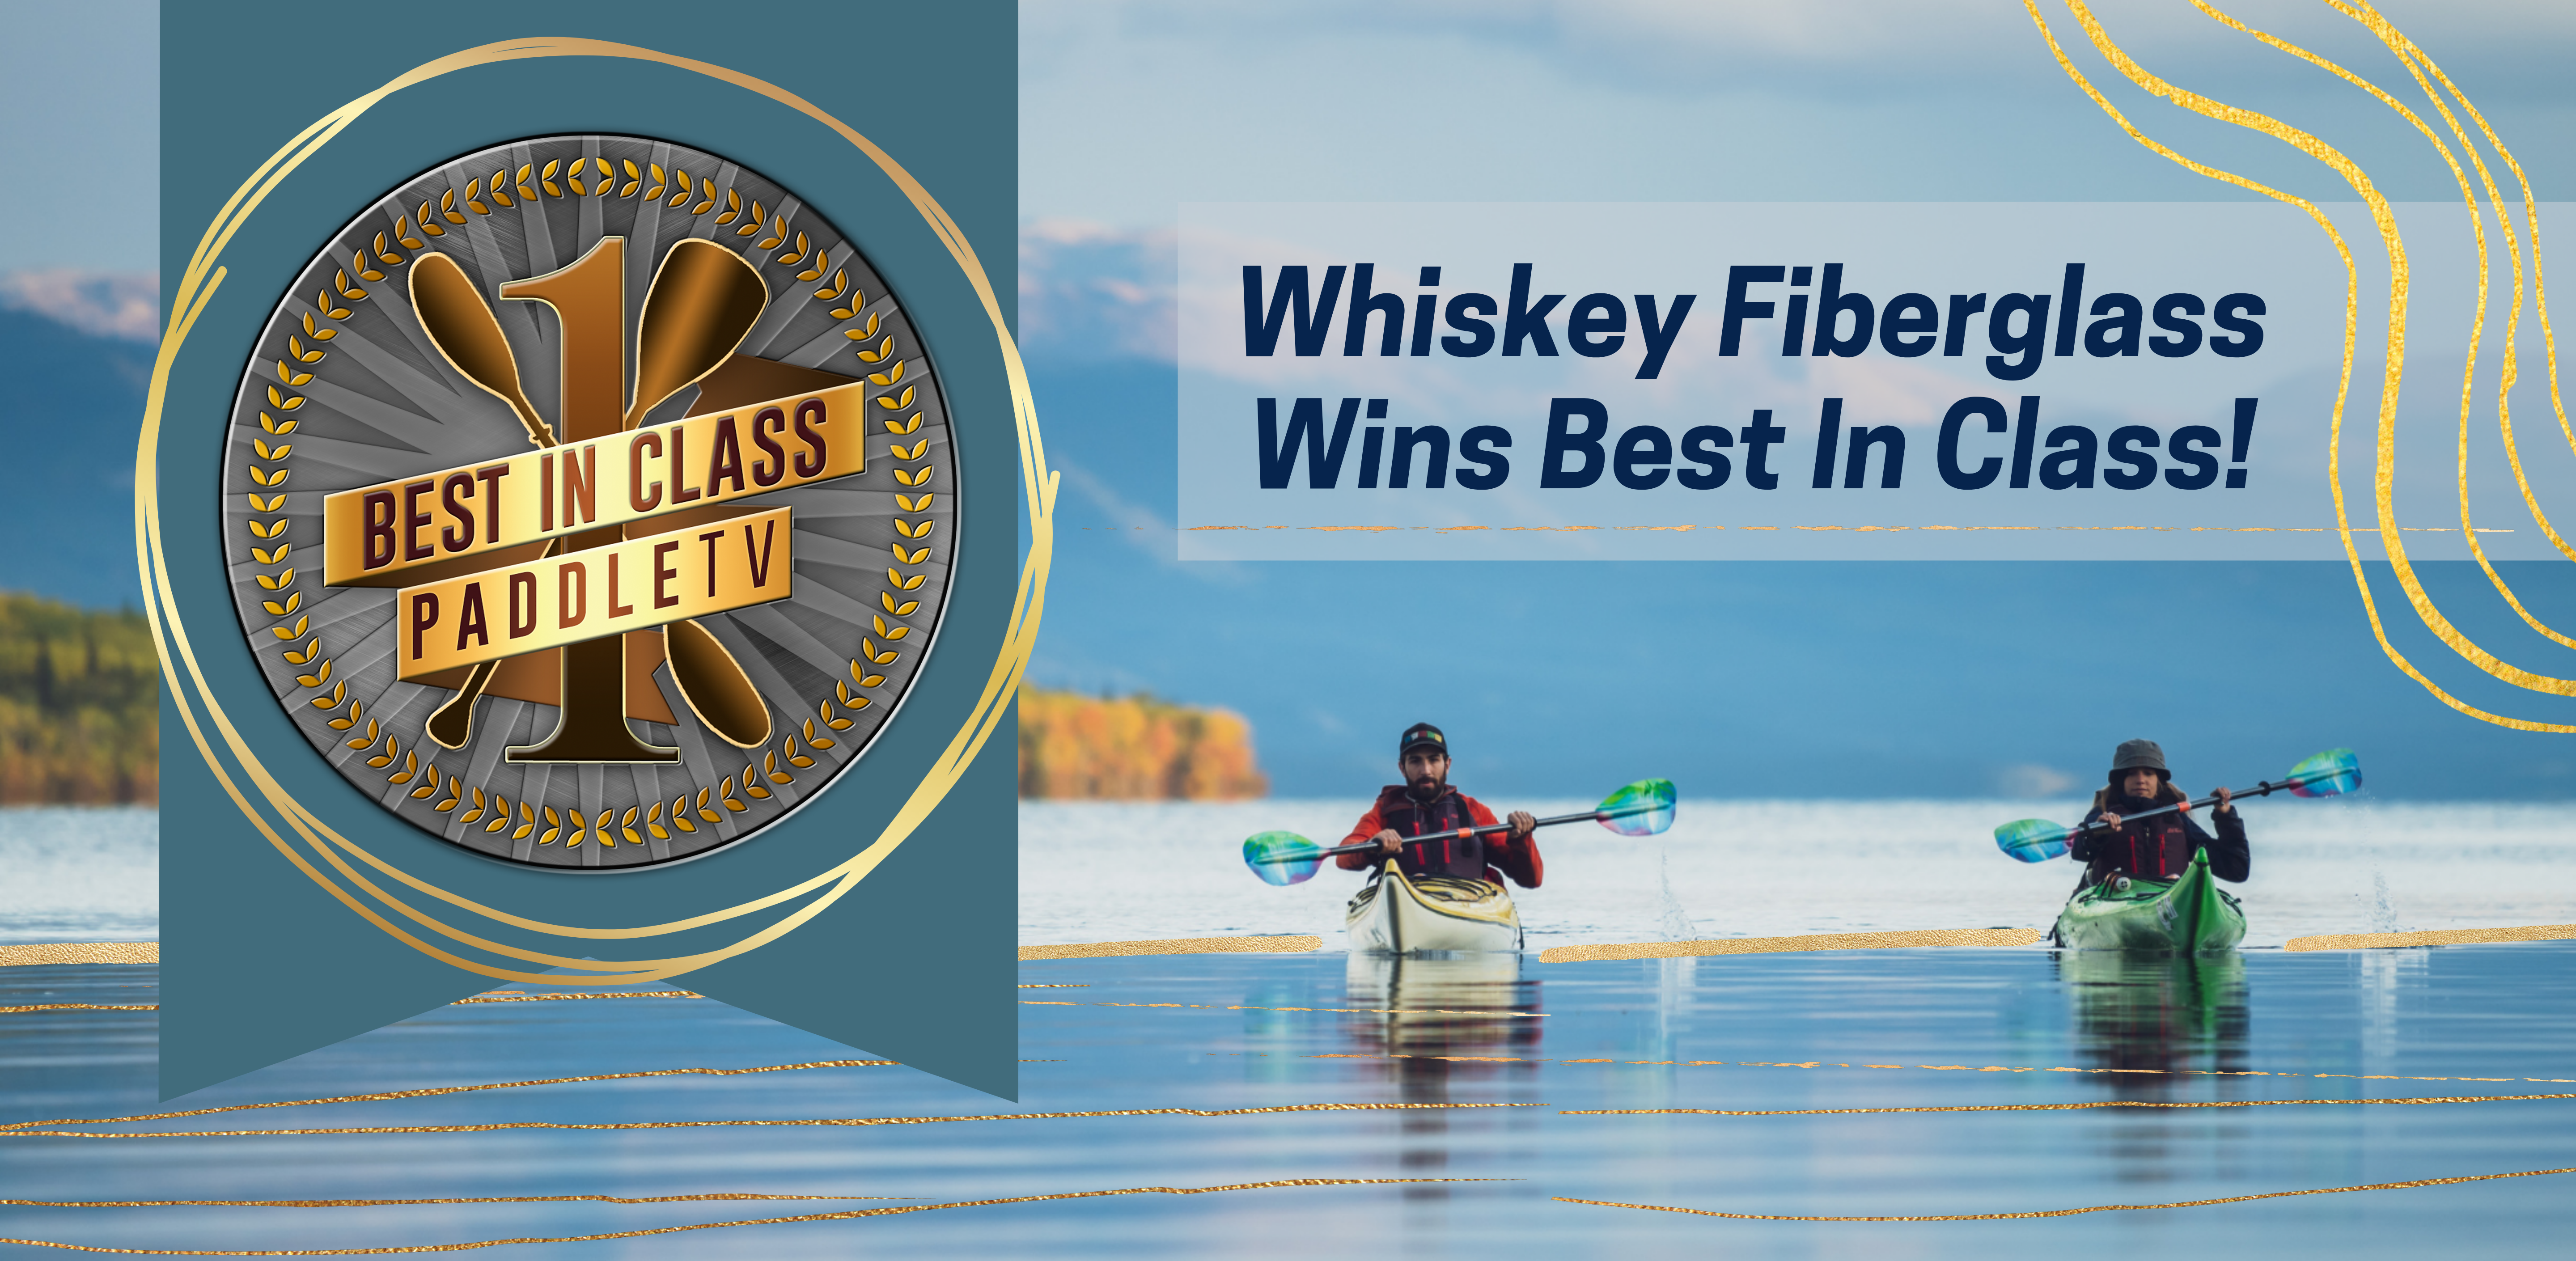 Our Whiskey Fiberglass Kayak Paddle Wins “Best in Class”